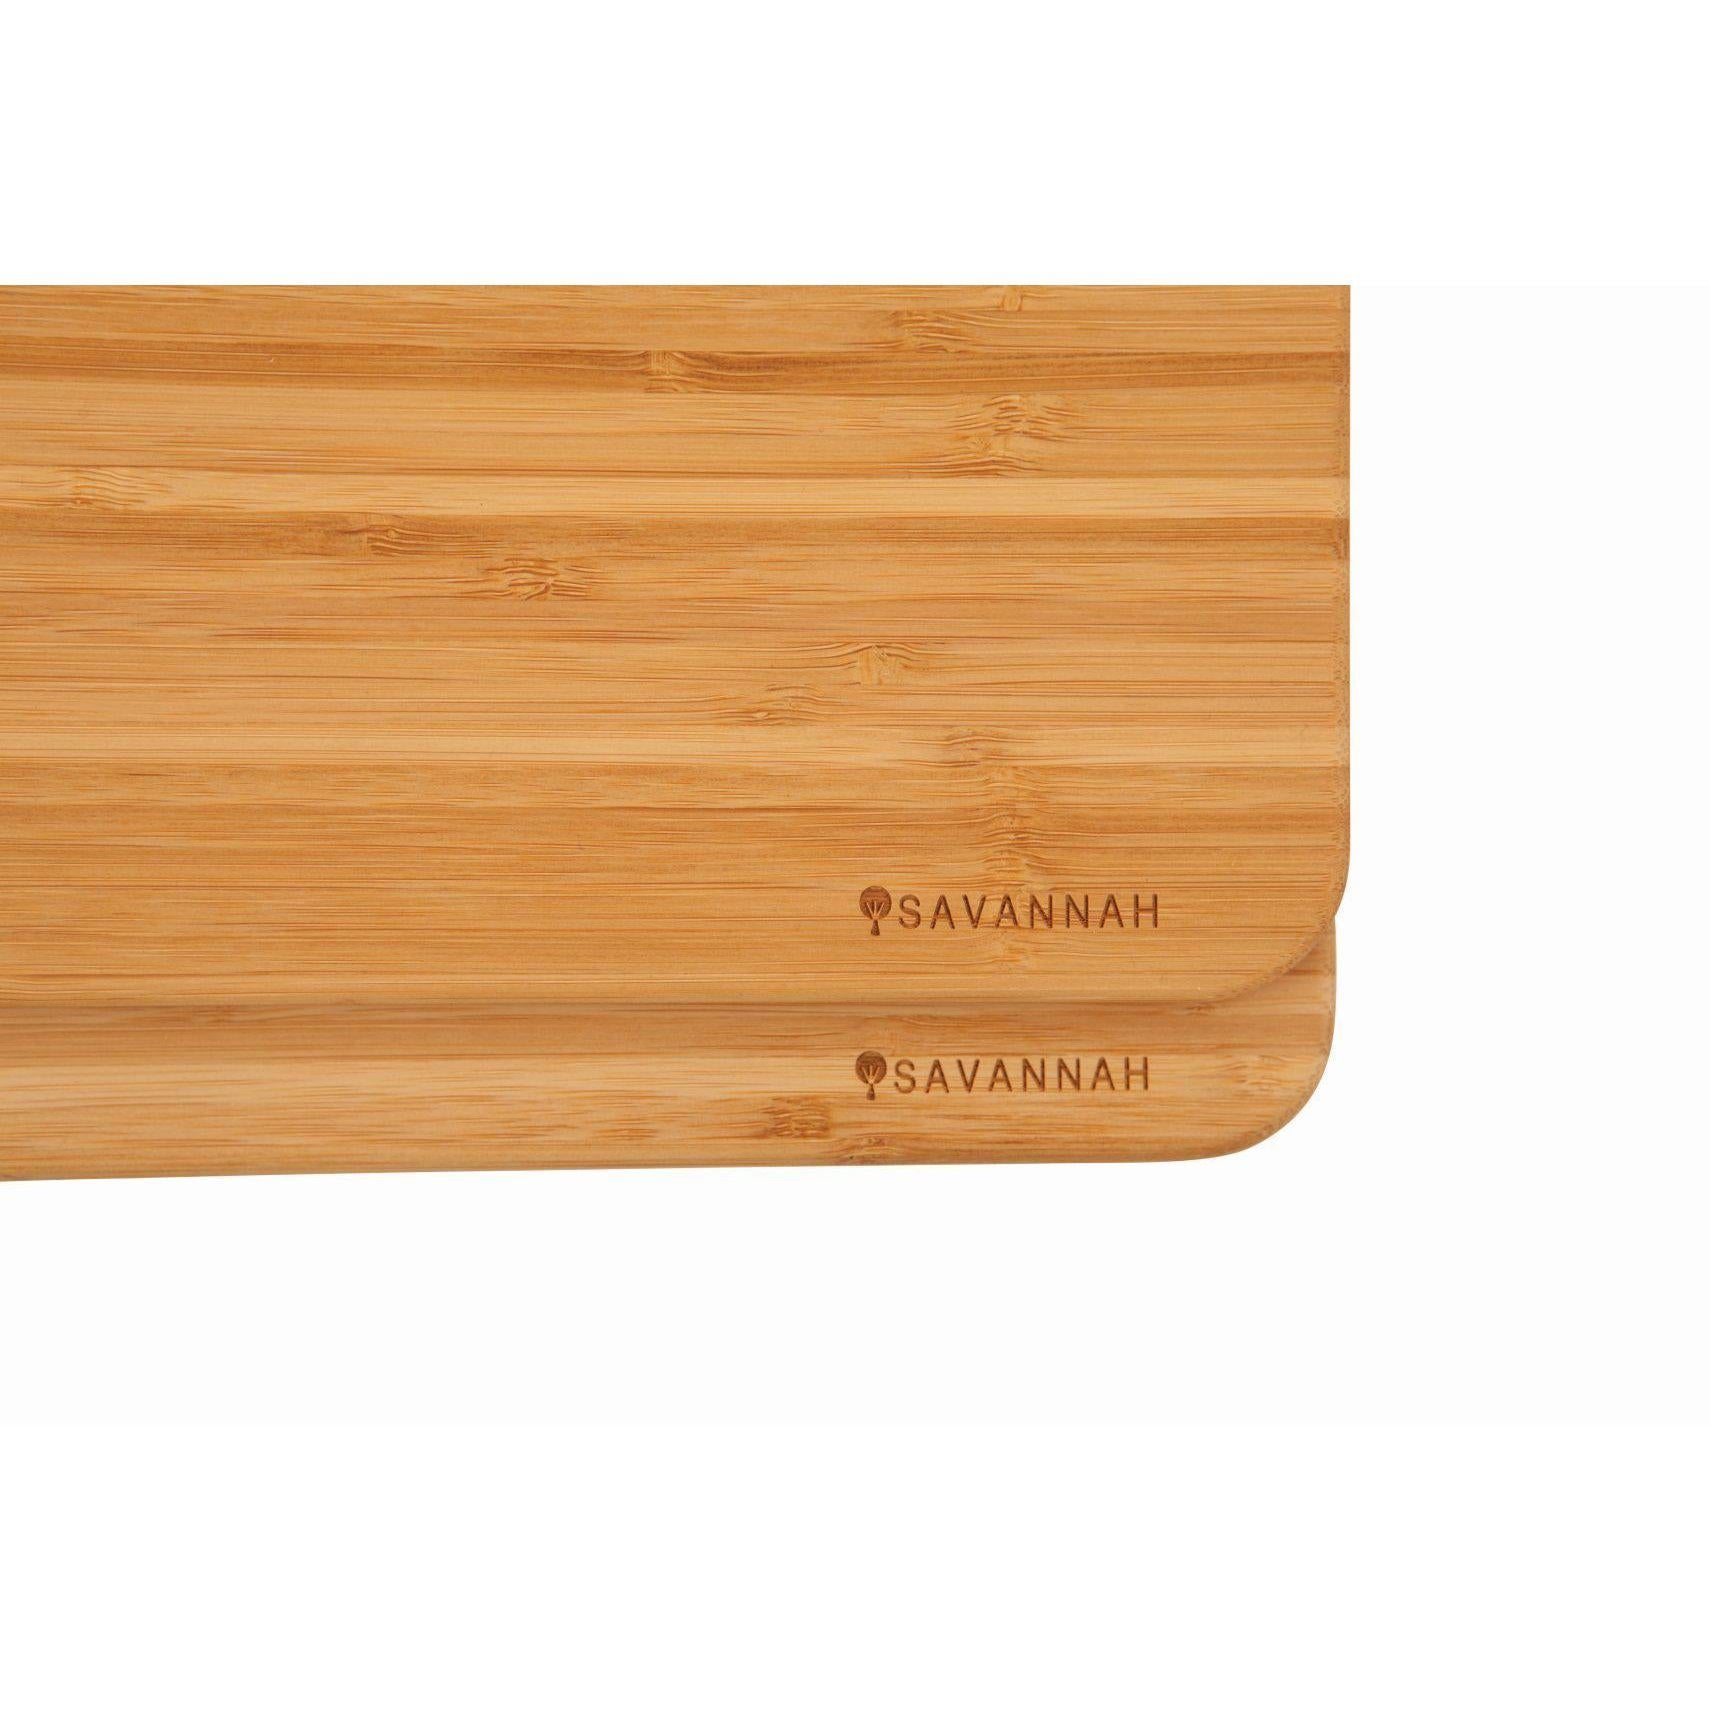 2 Piece Bamboo Cutting Board Set-cutting board-Chef's Quality Cookware